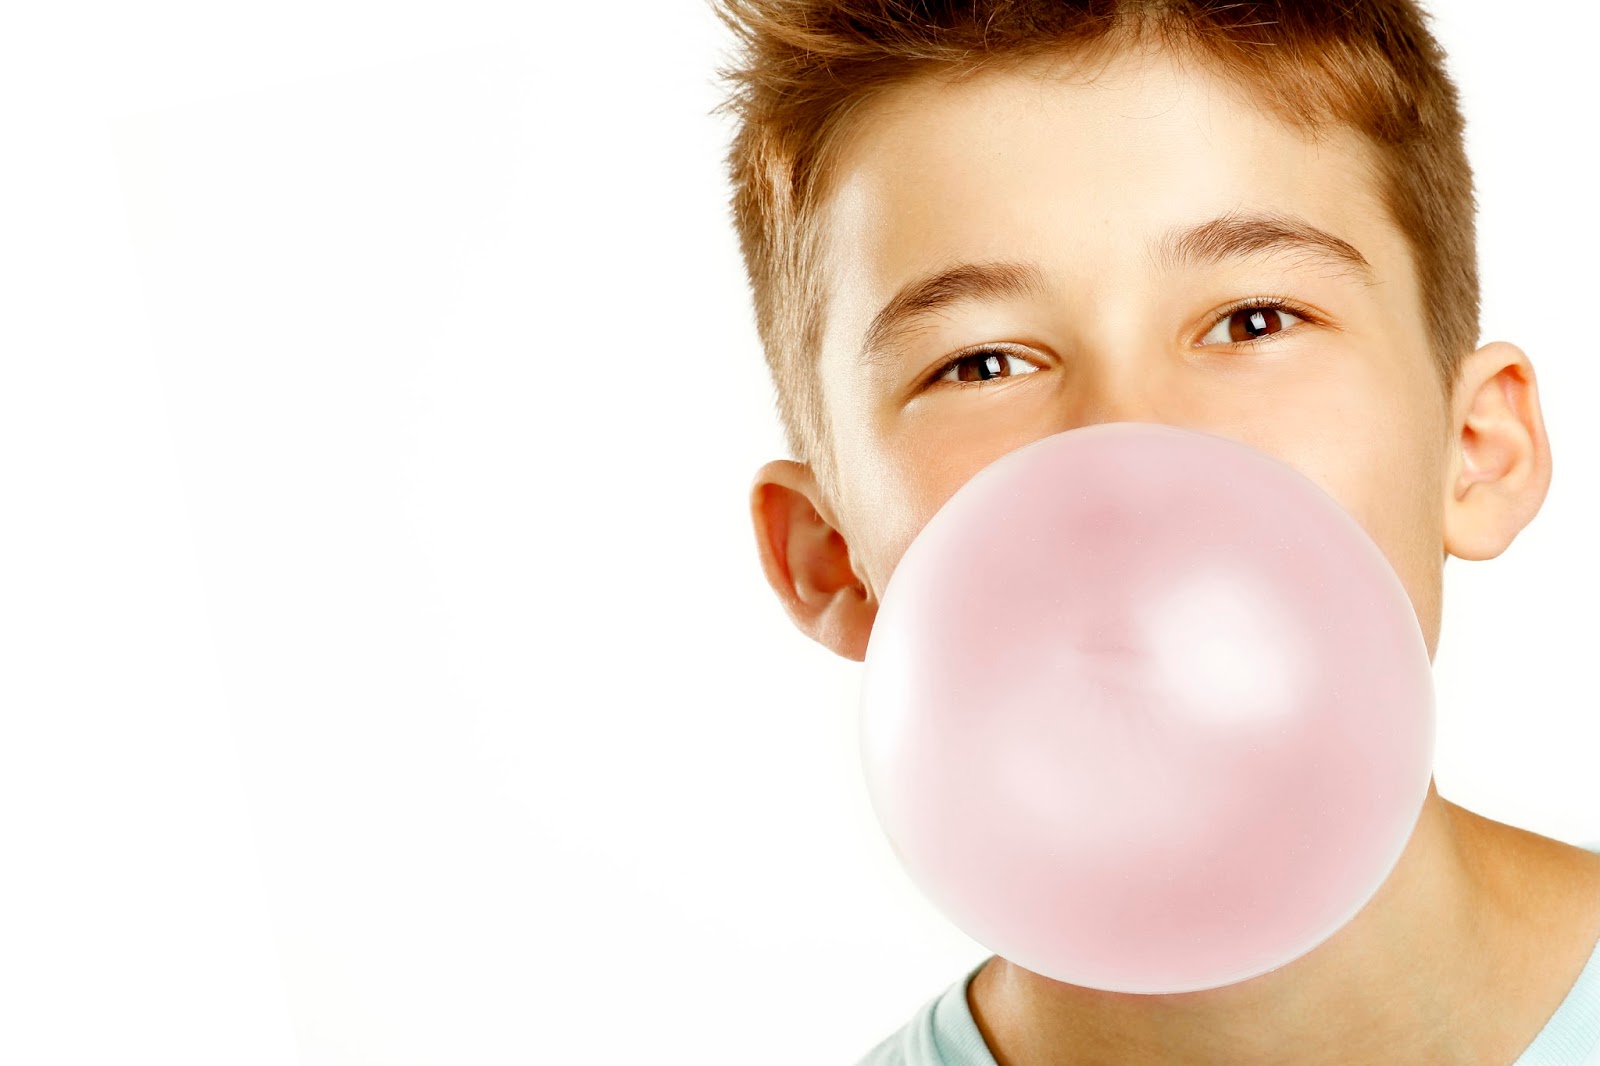 5-benefits-of-chewing-sugarless-gum-pediatric-dentistry-of-suffolk-county